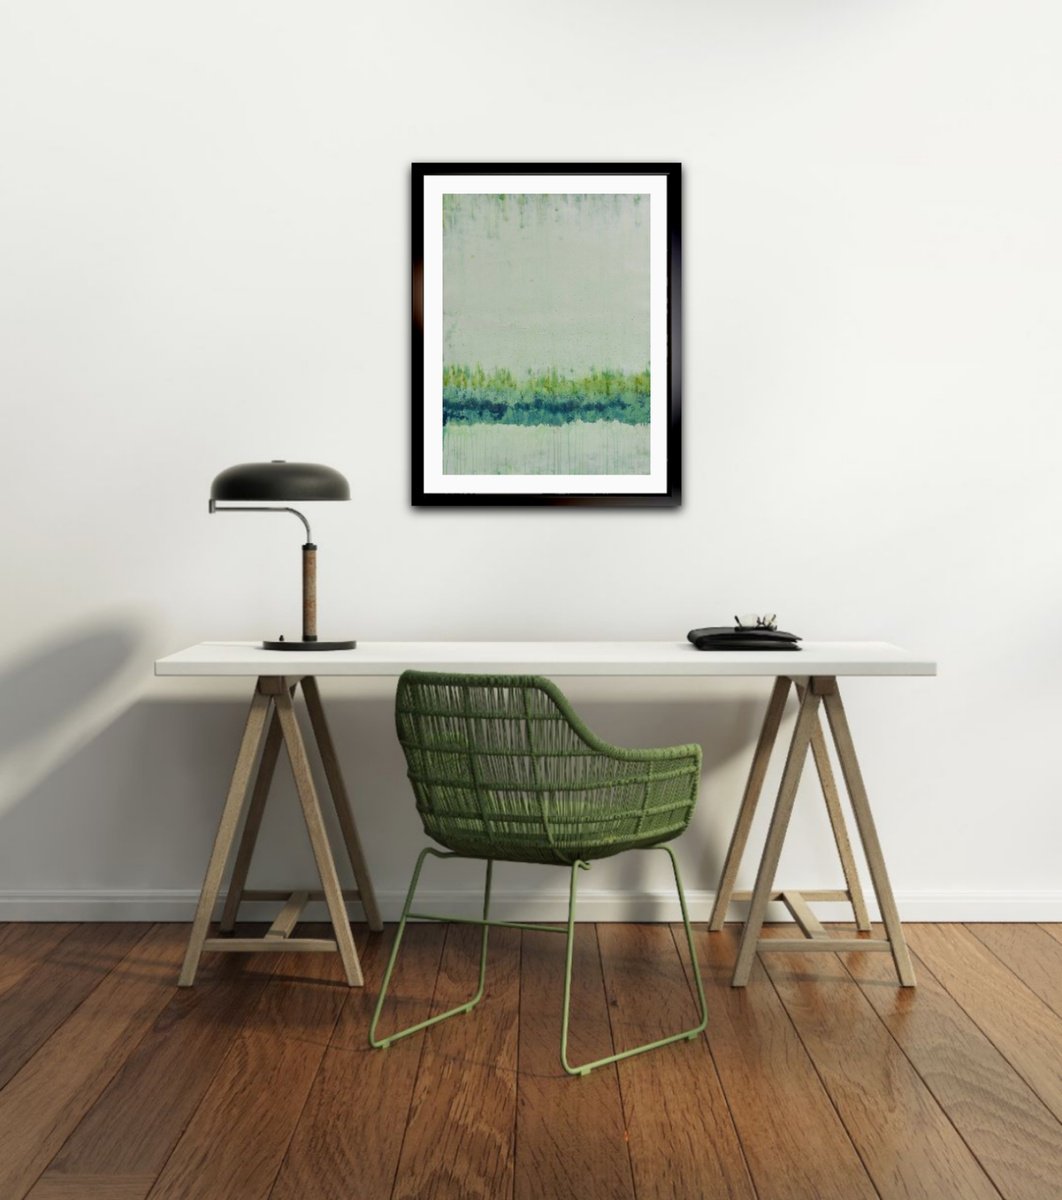 Misty Moss - Green minimalist abstract art on paper by Carney